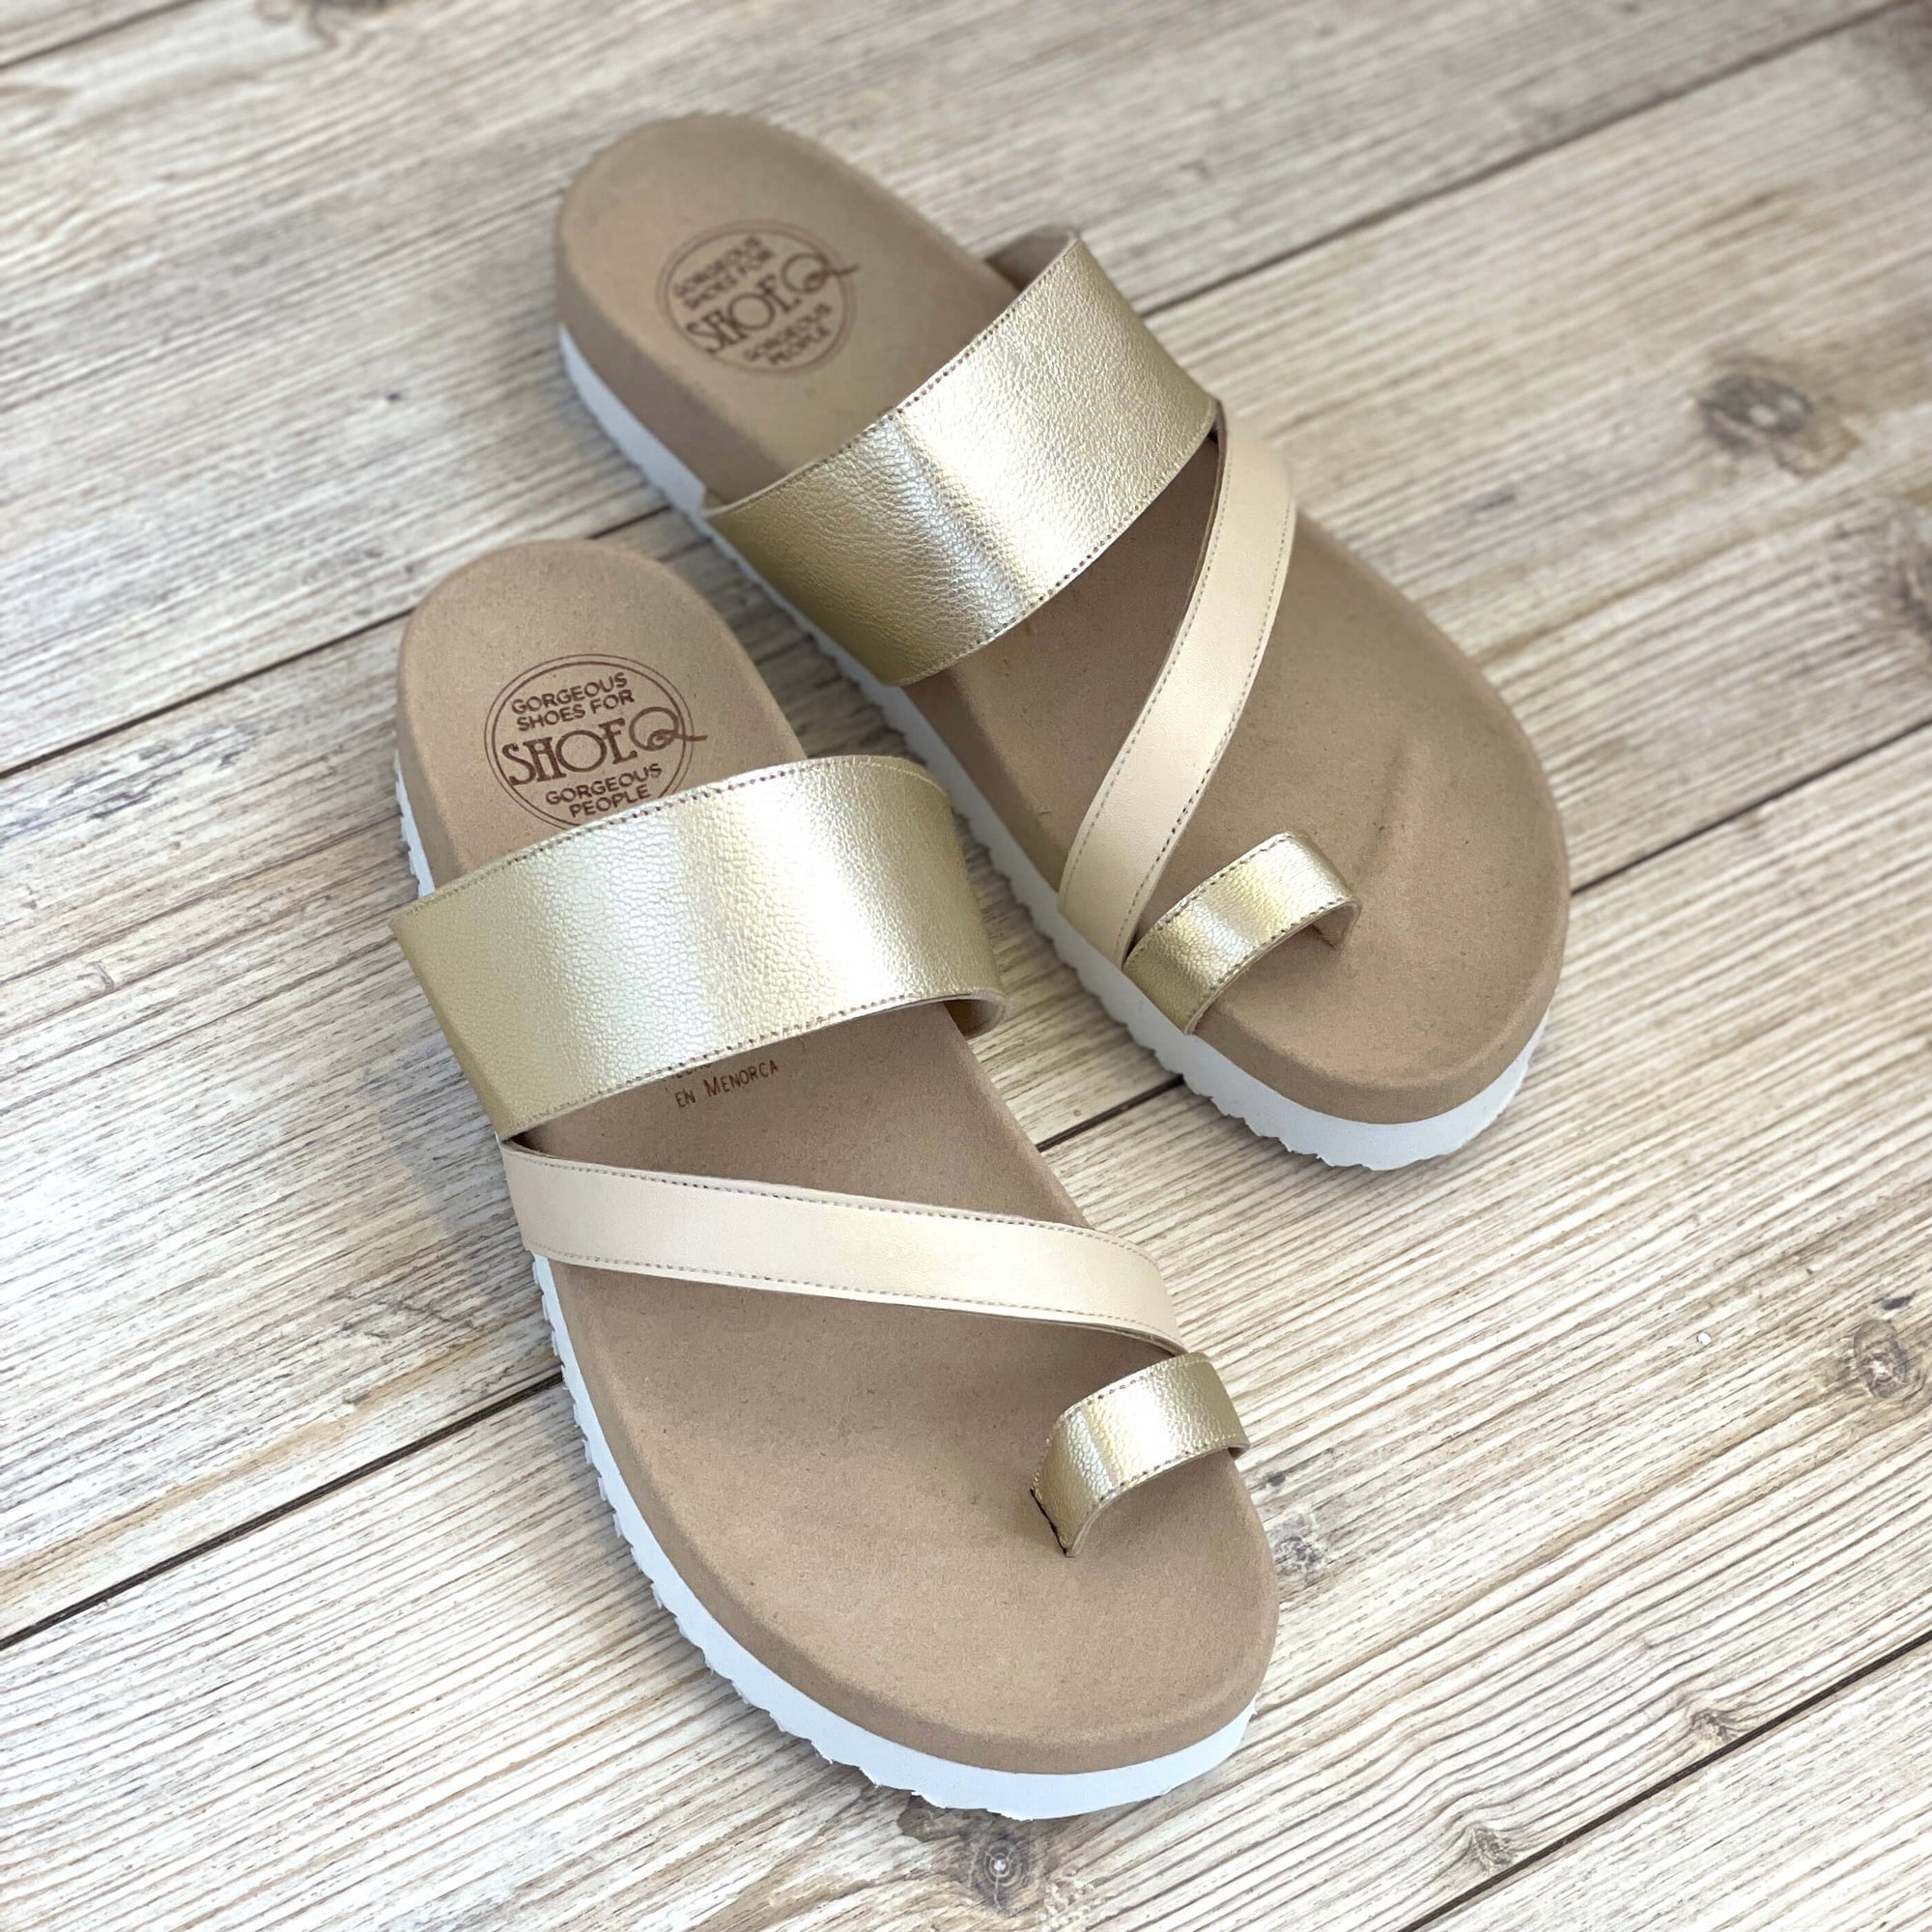 Athena Slide In Champagne Sand Front View - Shoeq 